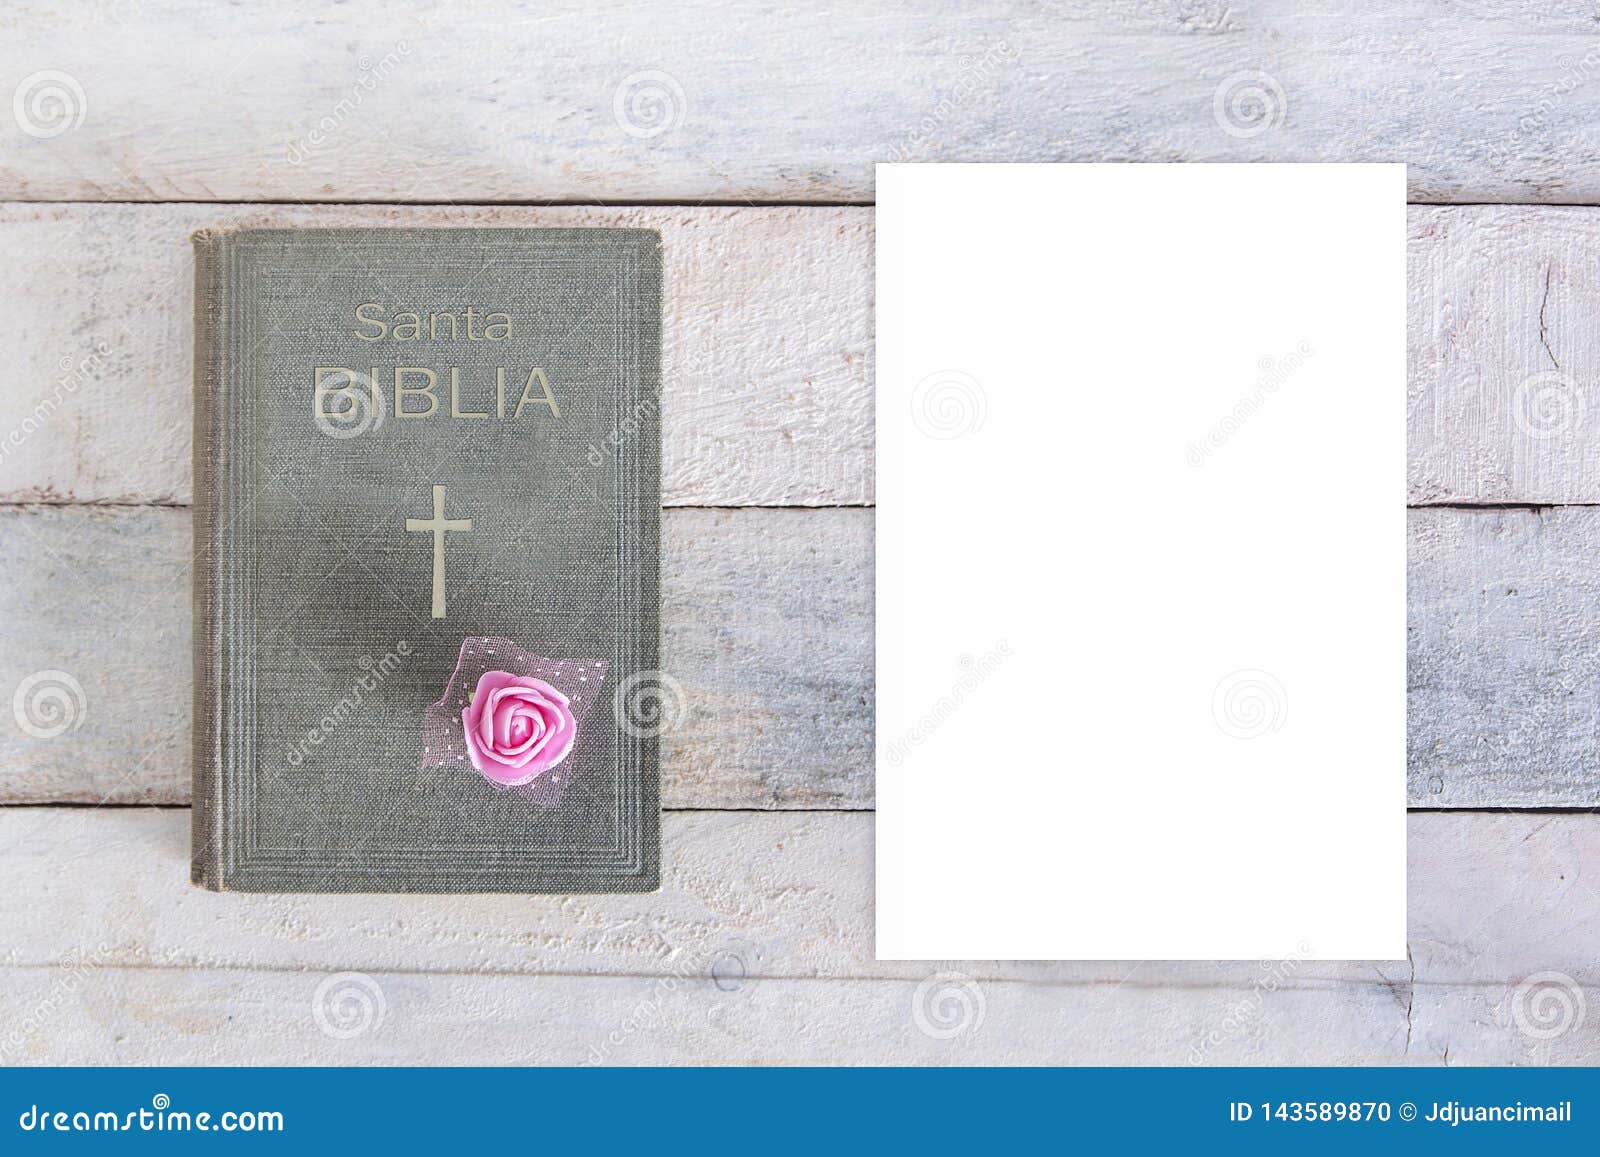 holy bible with the word biblia in spanish and a cross sign and a rose flower decoration next a blank white paper